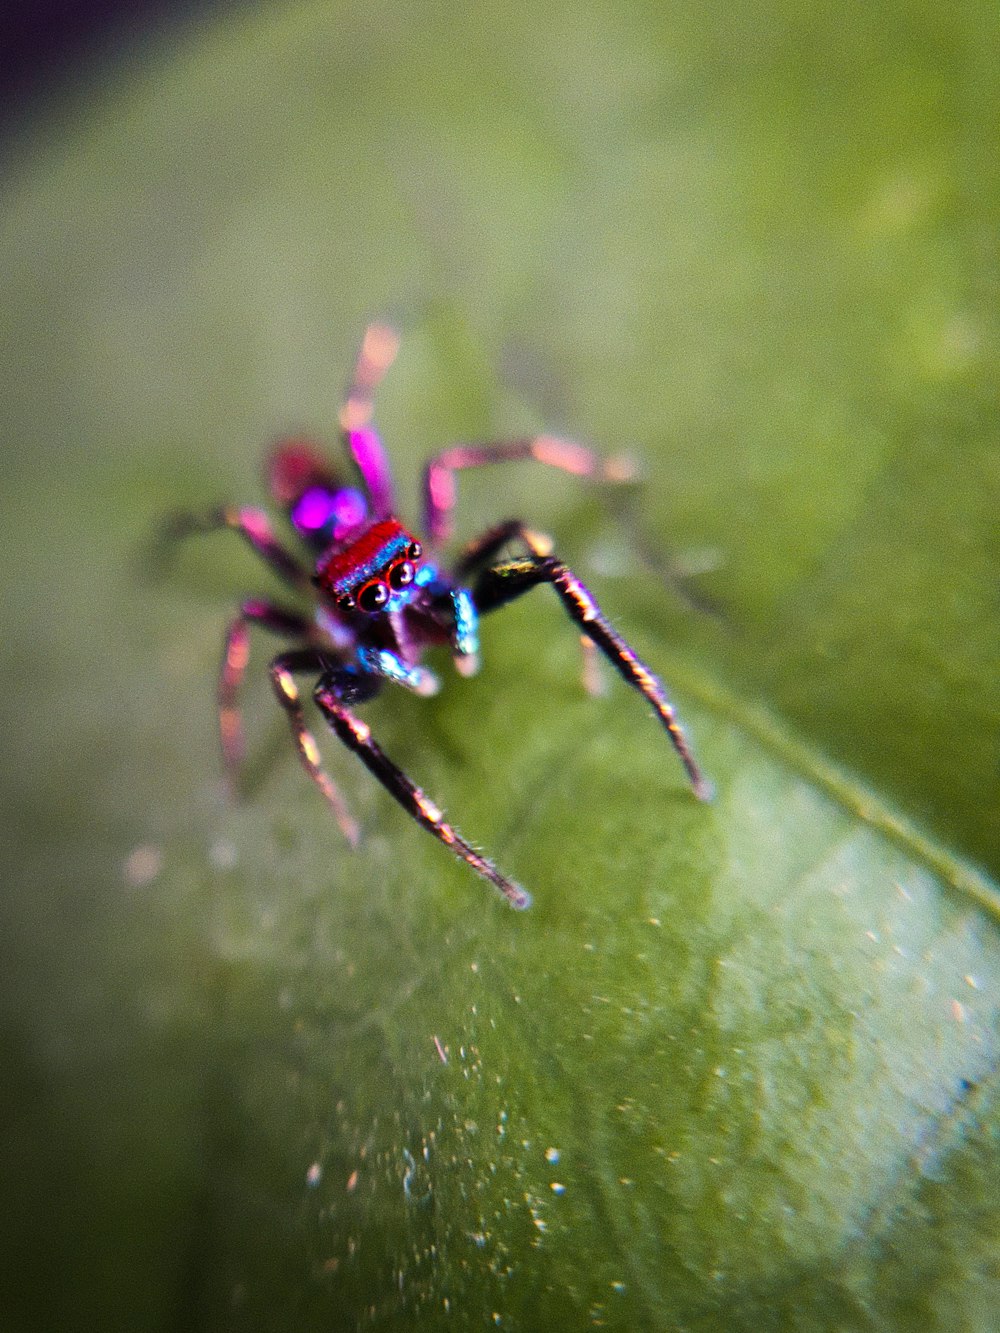 blue and black spider on green leaf in macro photography